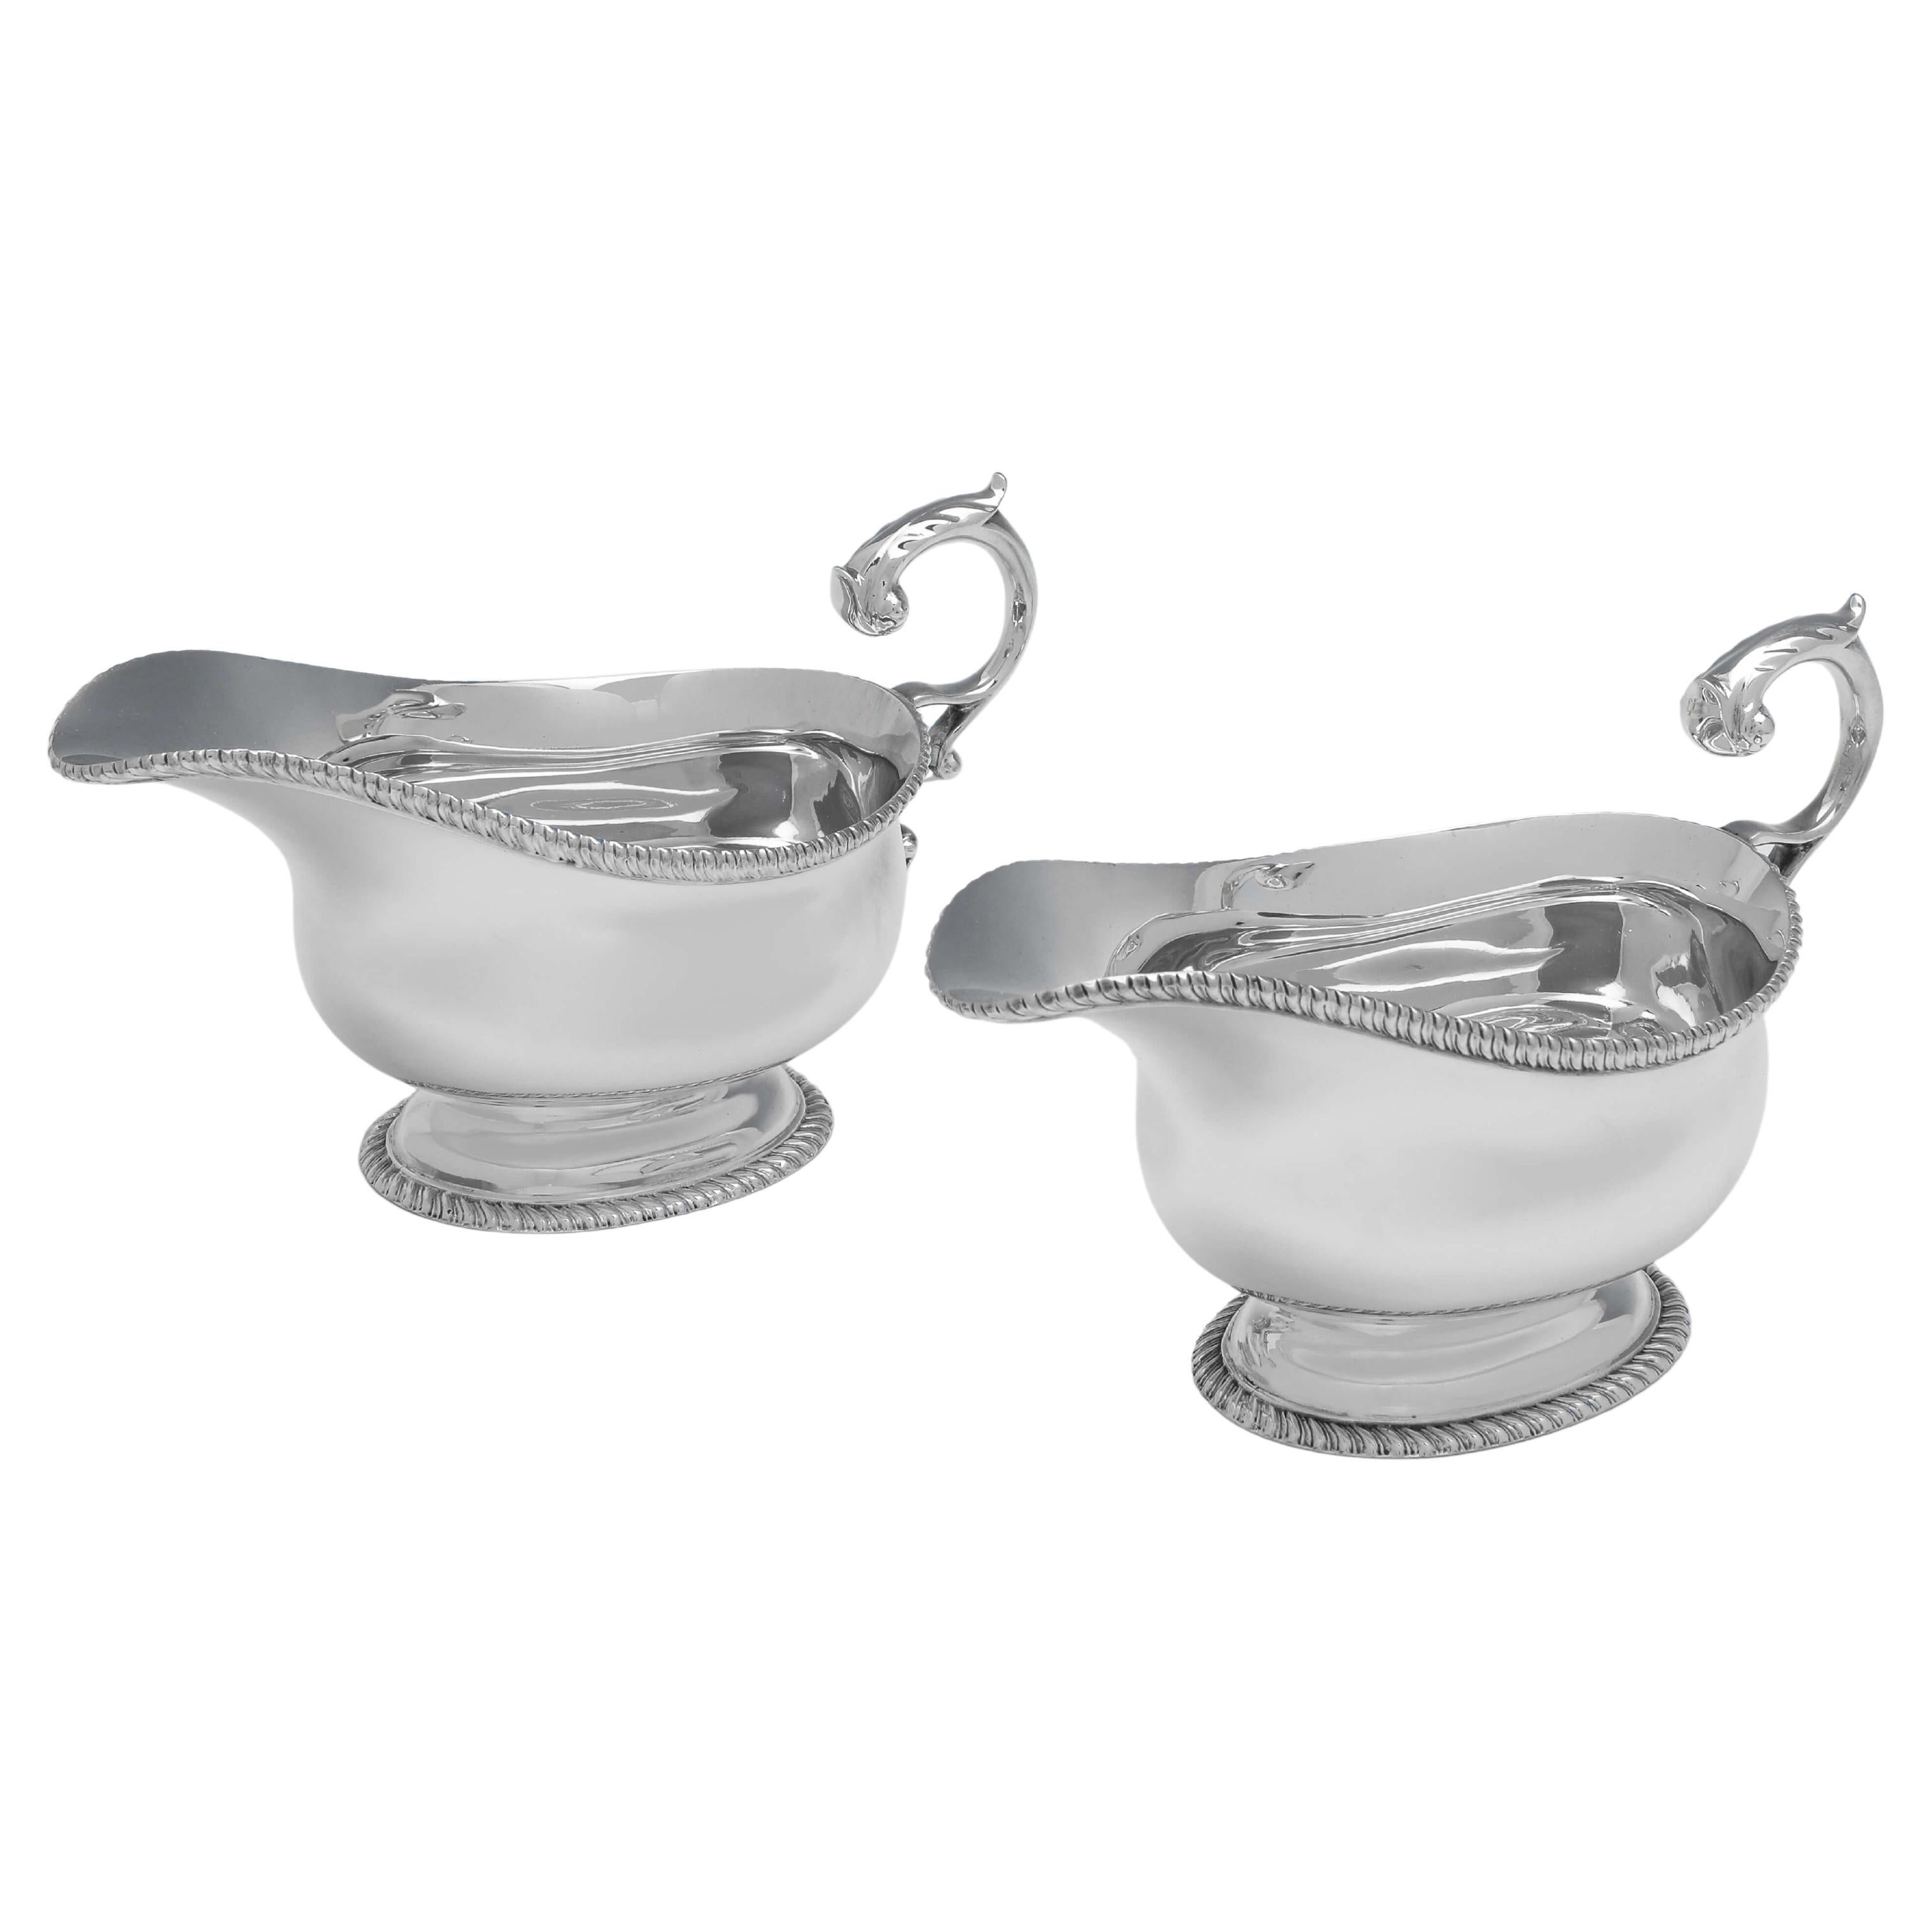 Art Deco Period Pair of Sterling Silver Sauce Boats, London 1939